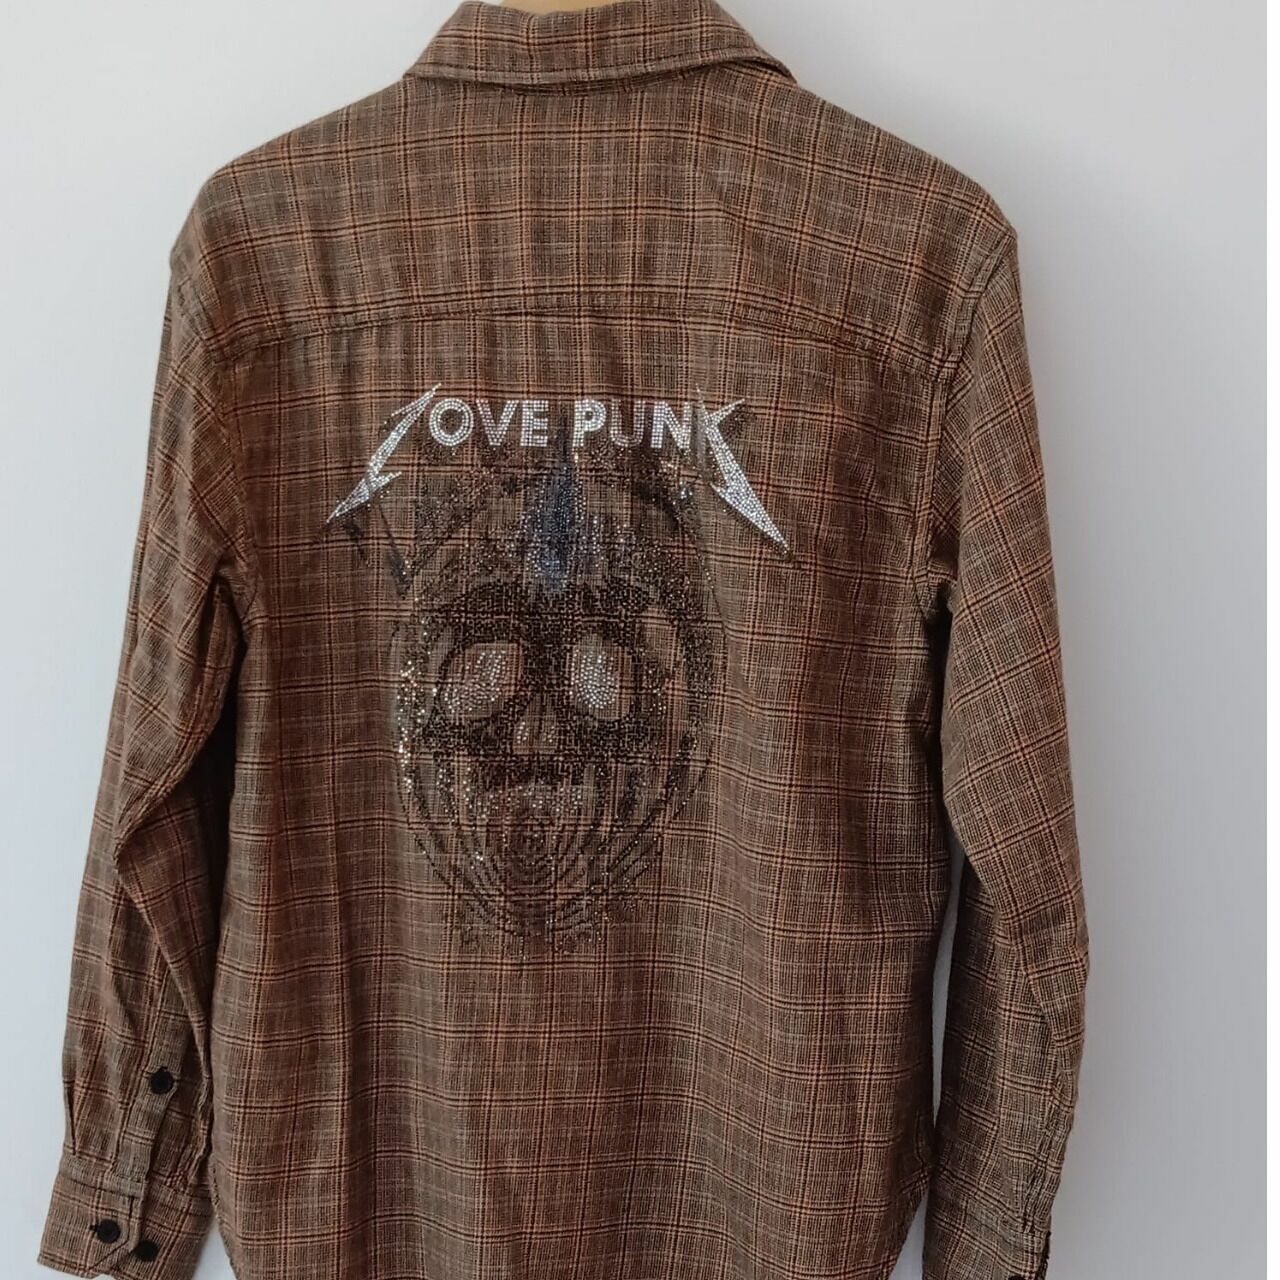 Zadig Voltaire Brown Beaded Love Punk Shirt